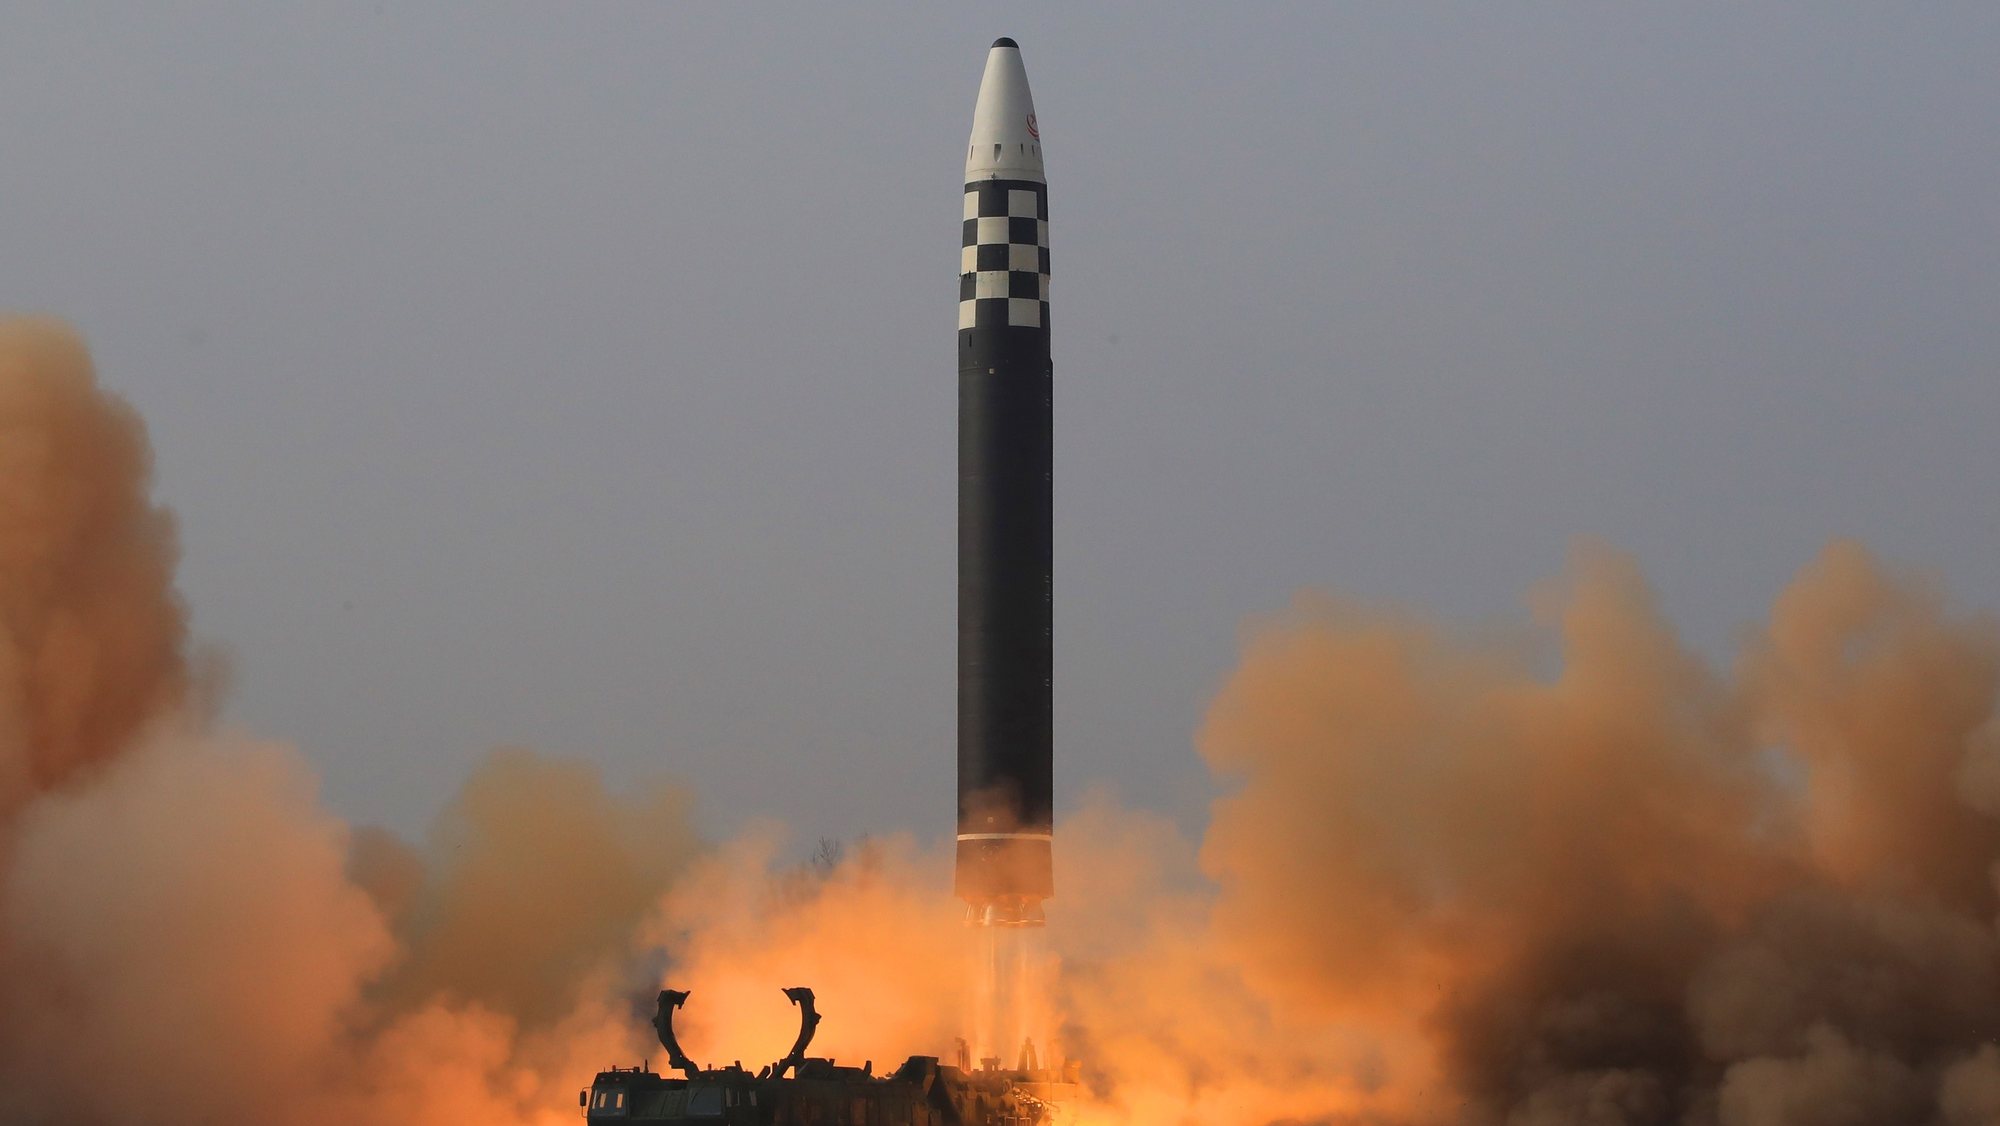 epa09848044 A photo released by the official North Korean Central News Agency (KCNA) shows the test-launch of a new type of inter-continental ballistic missile Hwasongpho-17 of the DPRK strategic forces that was conducted on 24 March 2022 (issued 25 March 2022).  EPA/KCNA   EDITORIAL USE ONLY